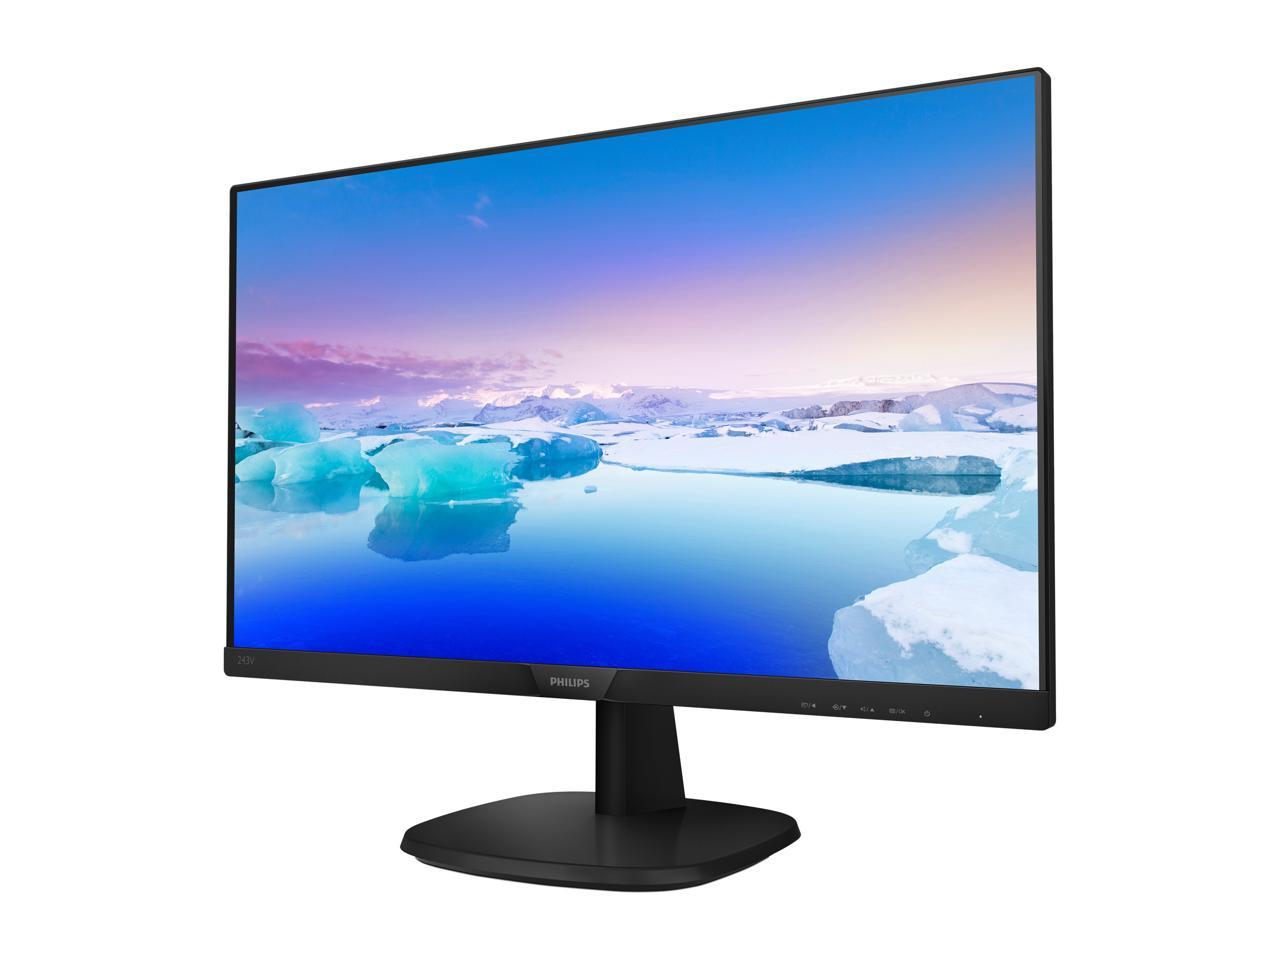 Philips 23.8" LCD Monitor with LED Backlight - image 2 of 8